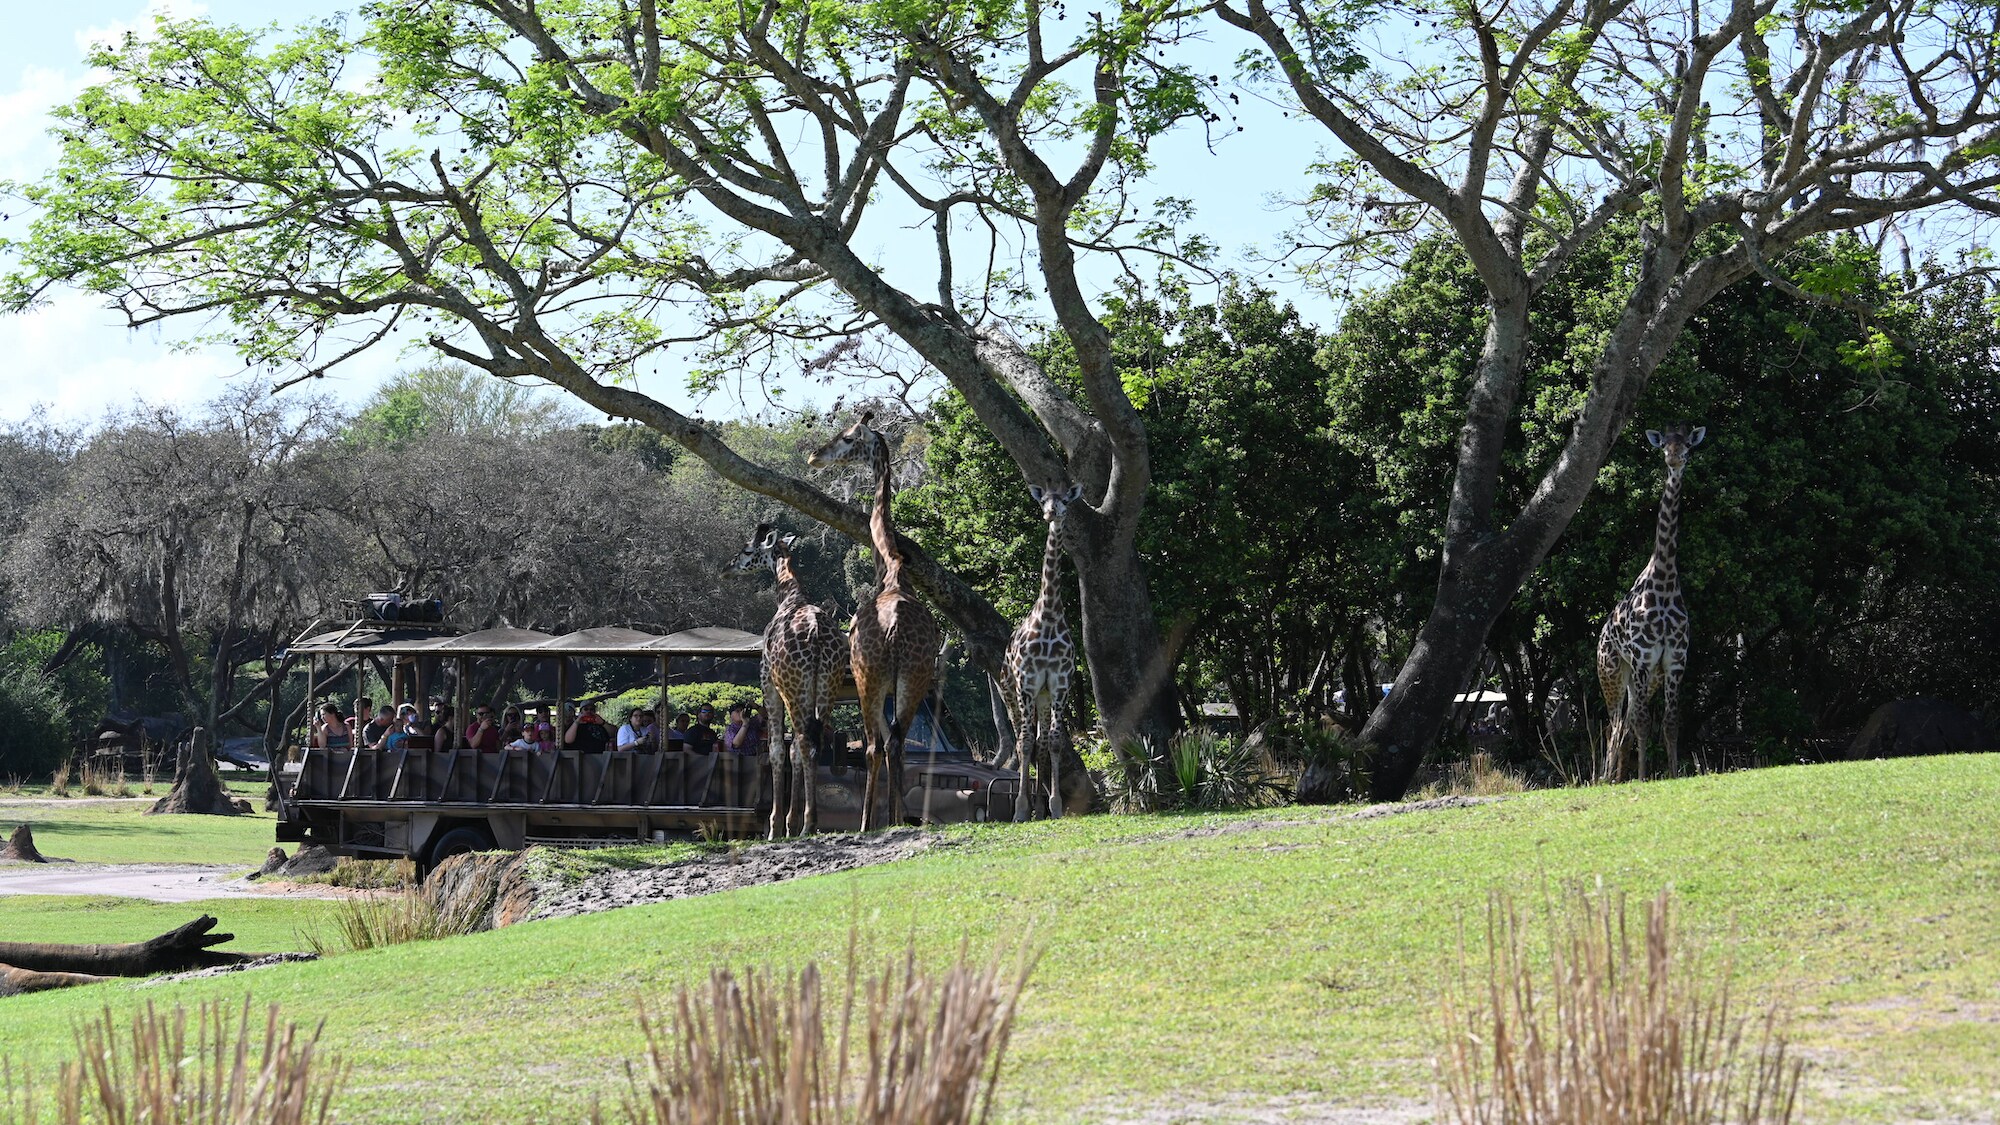 Guests observe giraffes on the savanna. (National Geographic/Gene Page)